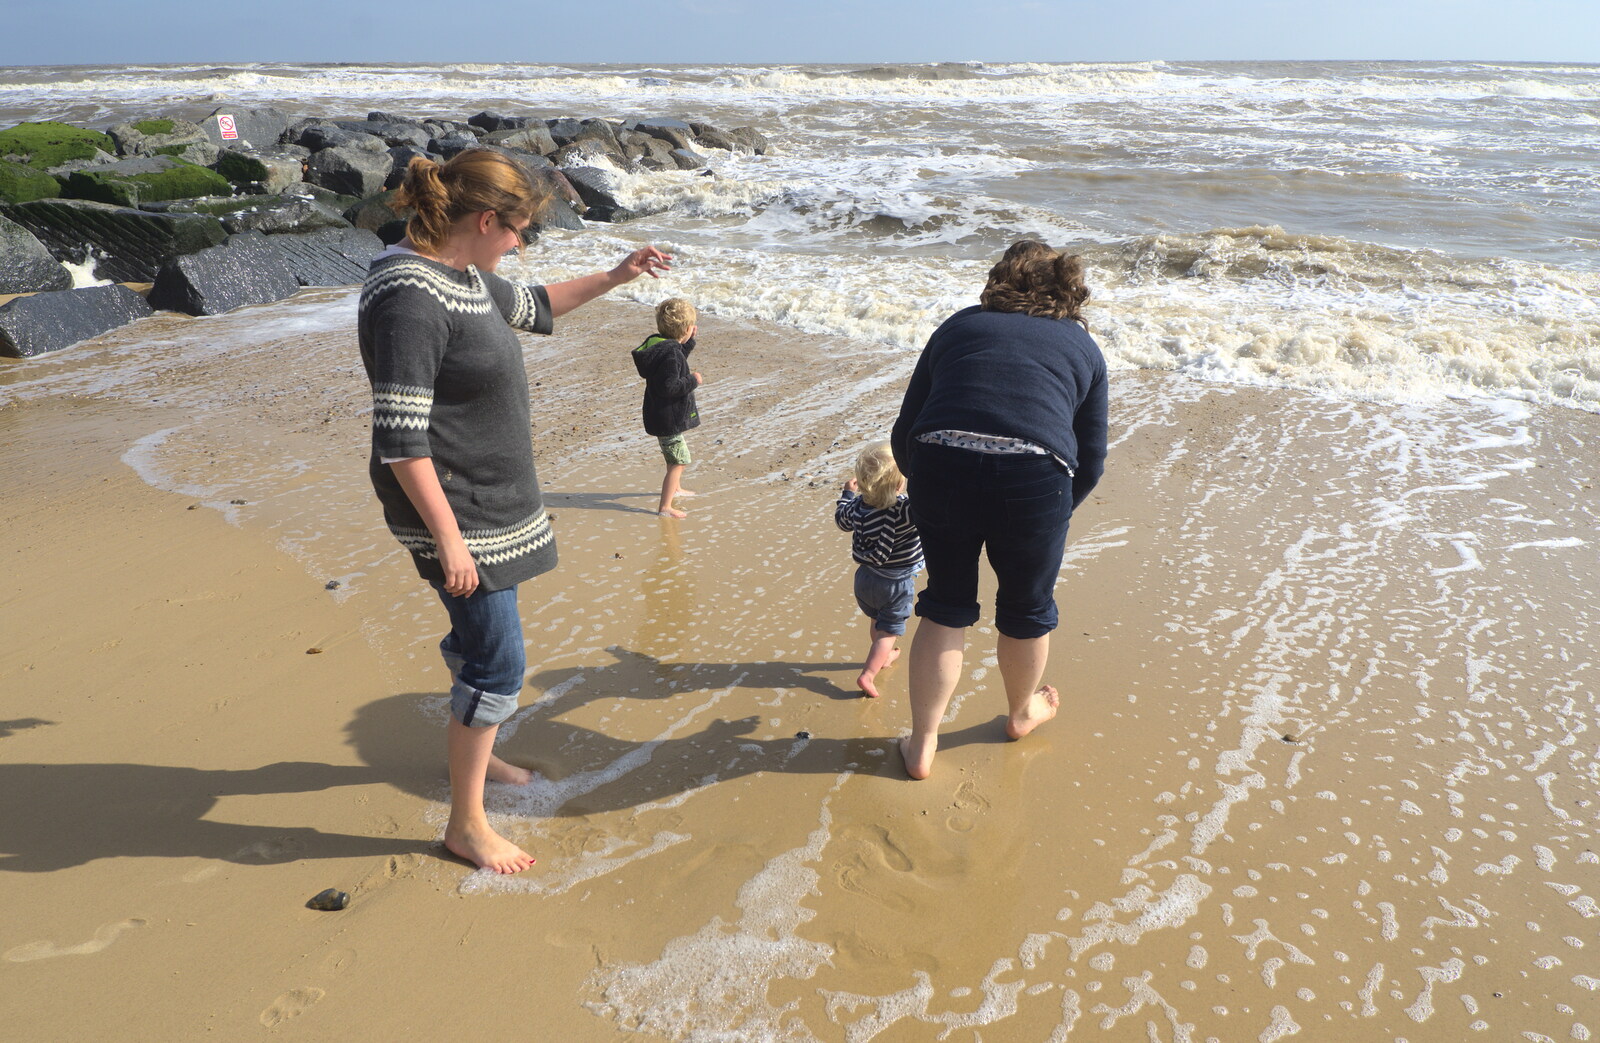 Isobel, Sis and the boys from Southwold By The Sea, Suffolk - 29th September 2013